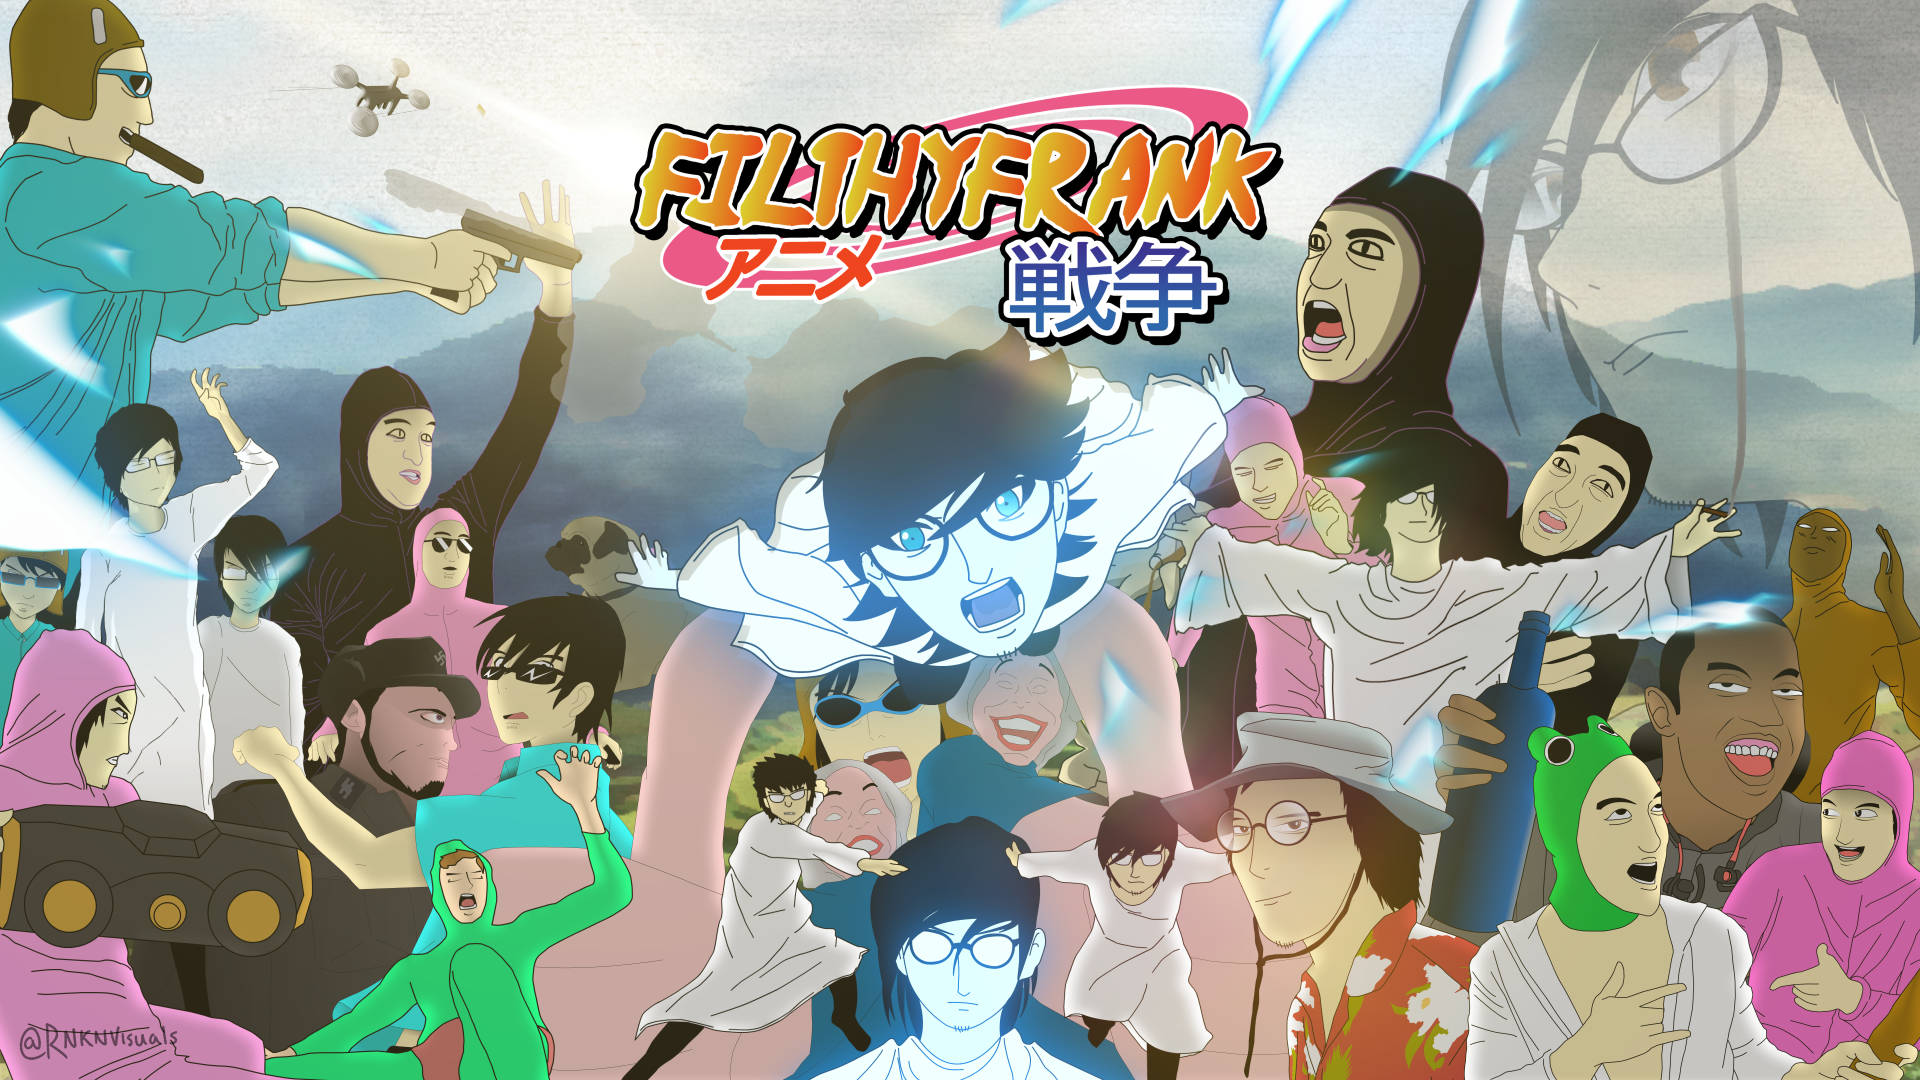 Filthy Frank As An Anime Background